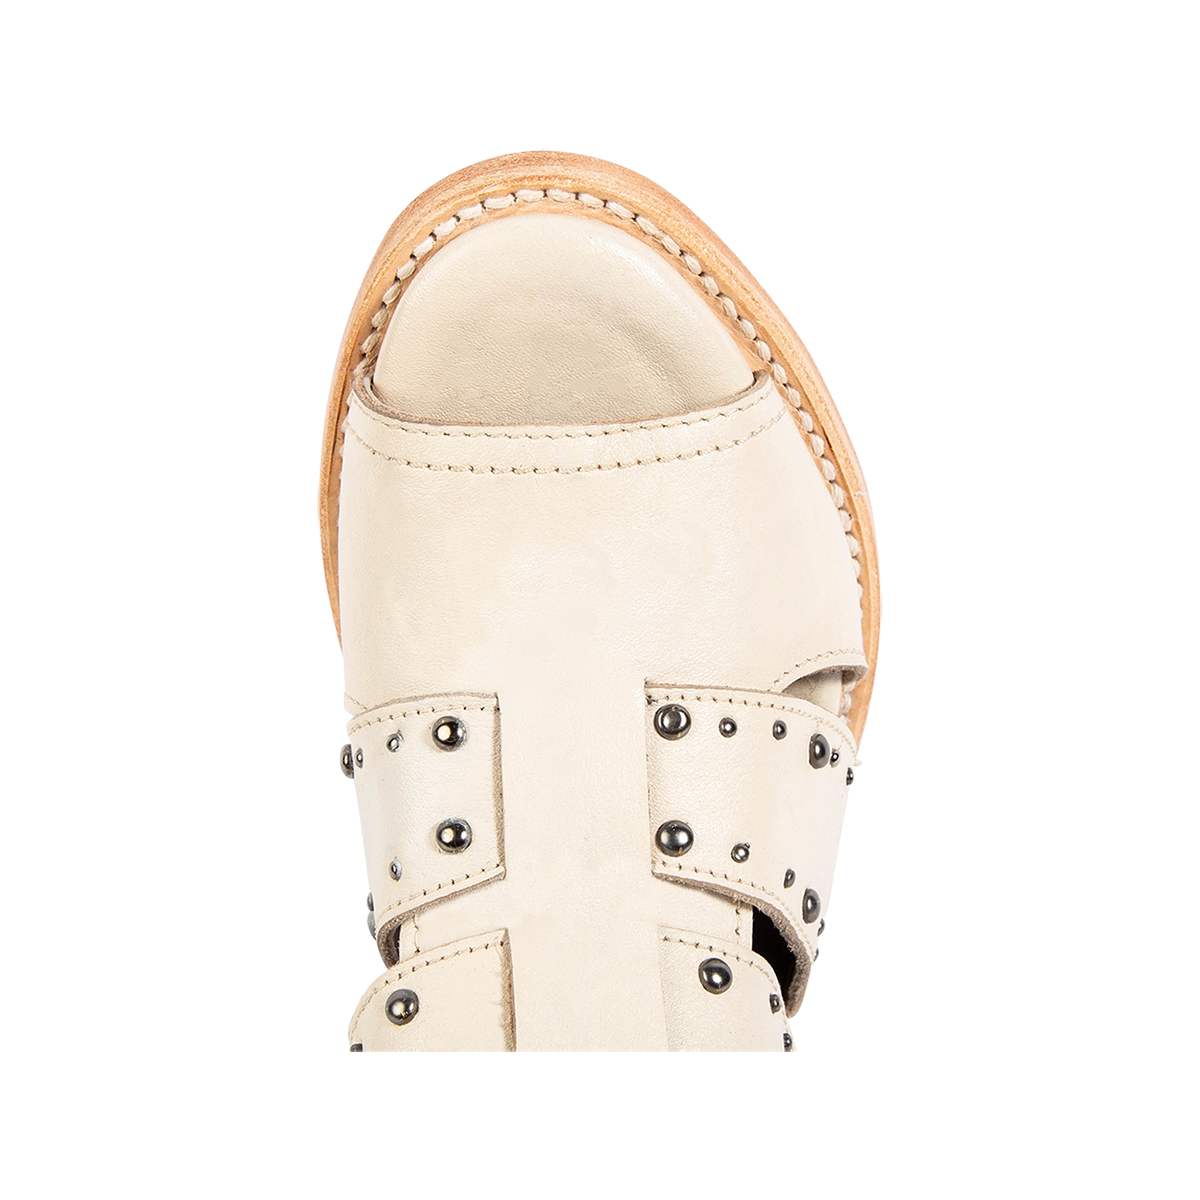 Top view showing a rounded toe and metal embellishments on FREEBIRD women's Ghost off white leather sandal